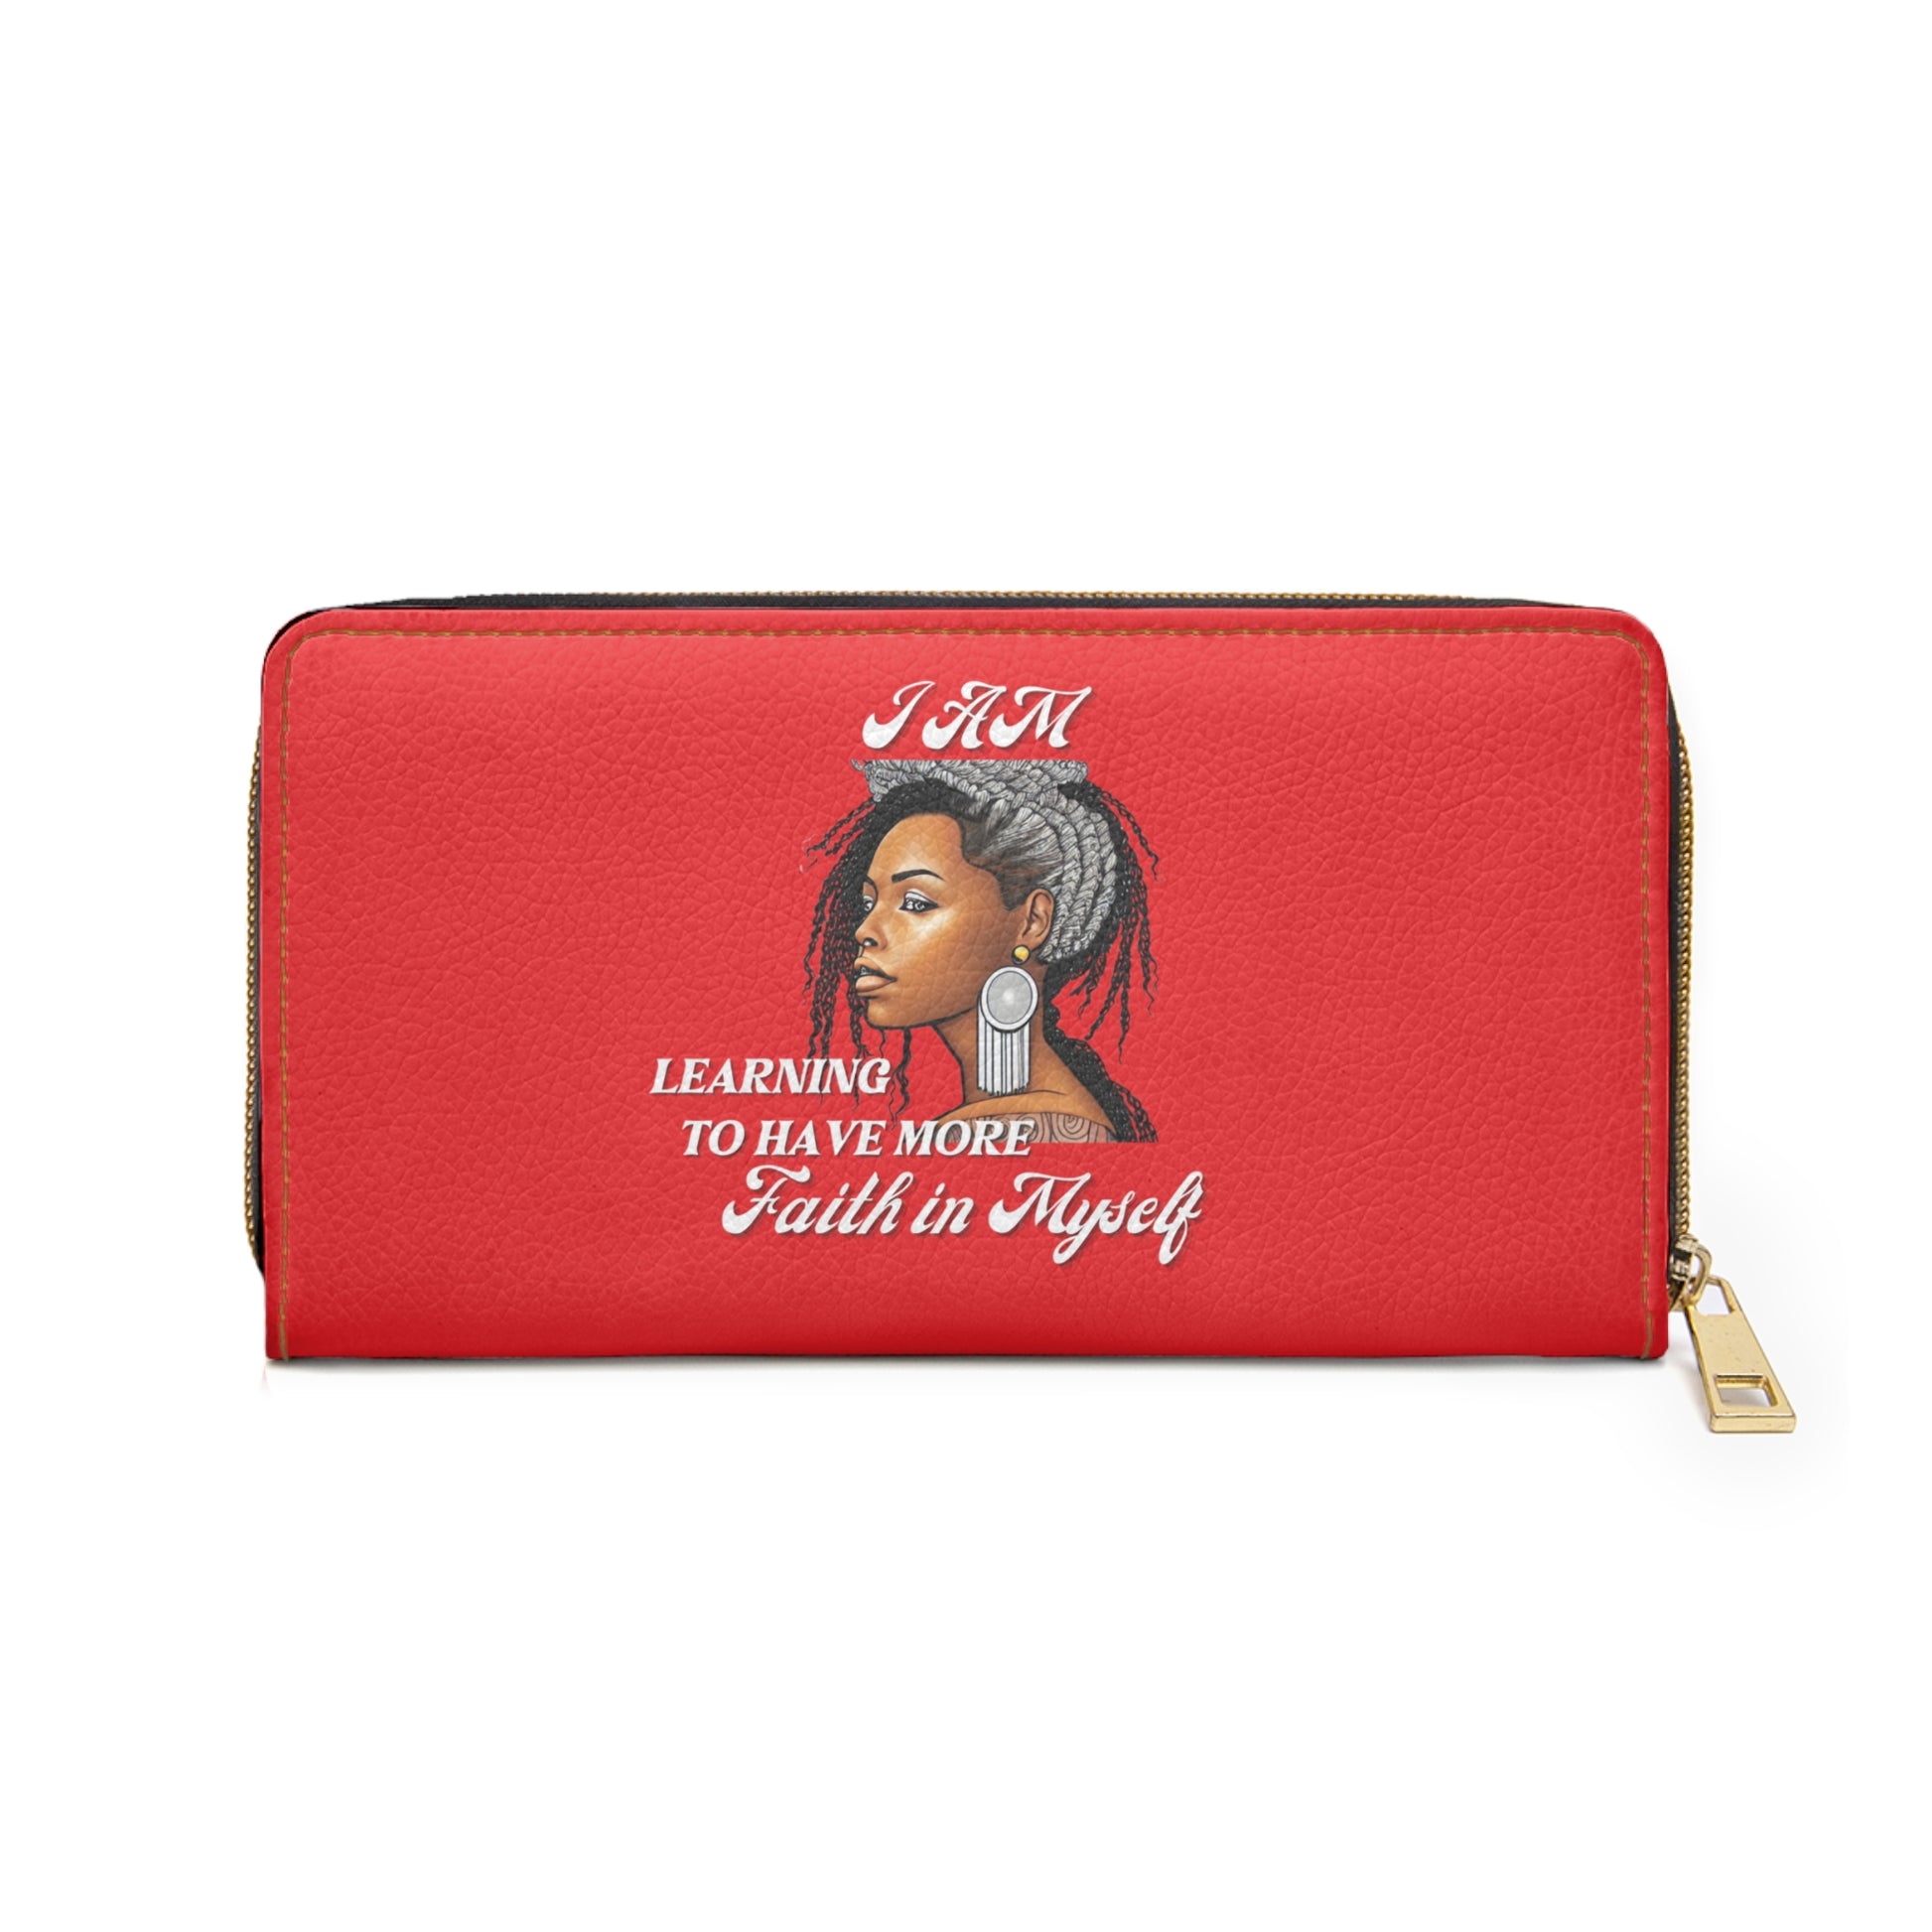 " Faith In Myself" -Positive Afrocentric Affirmation Vegan Leather Wallet Bag- Empower Your Style and Self-Love; Red Wallet